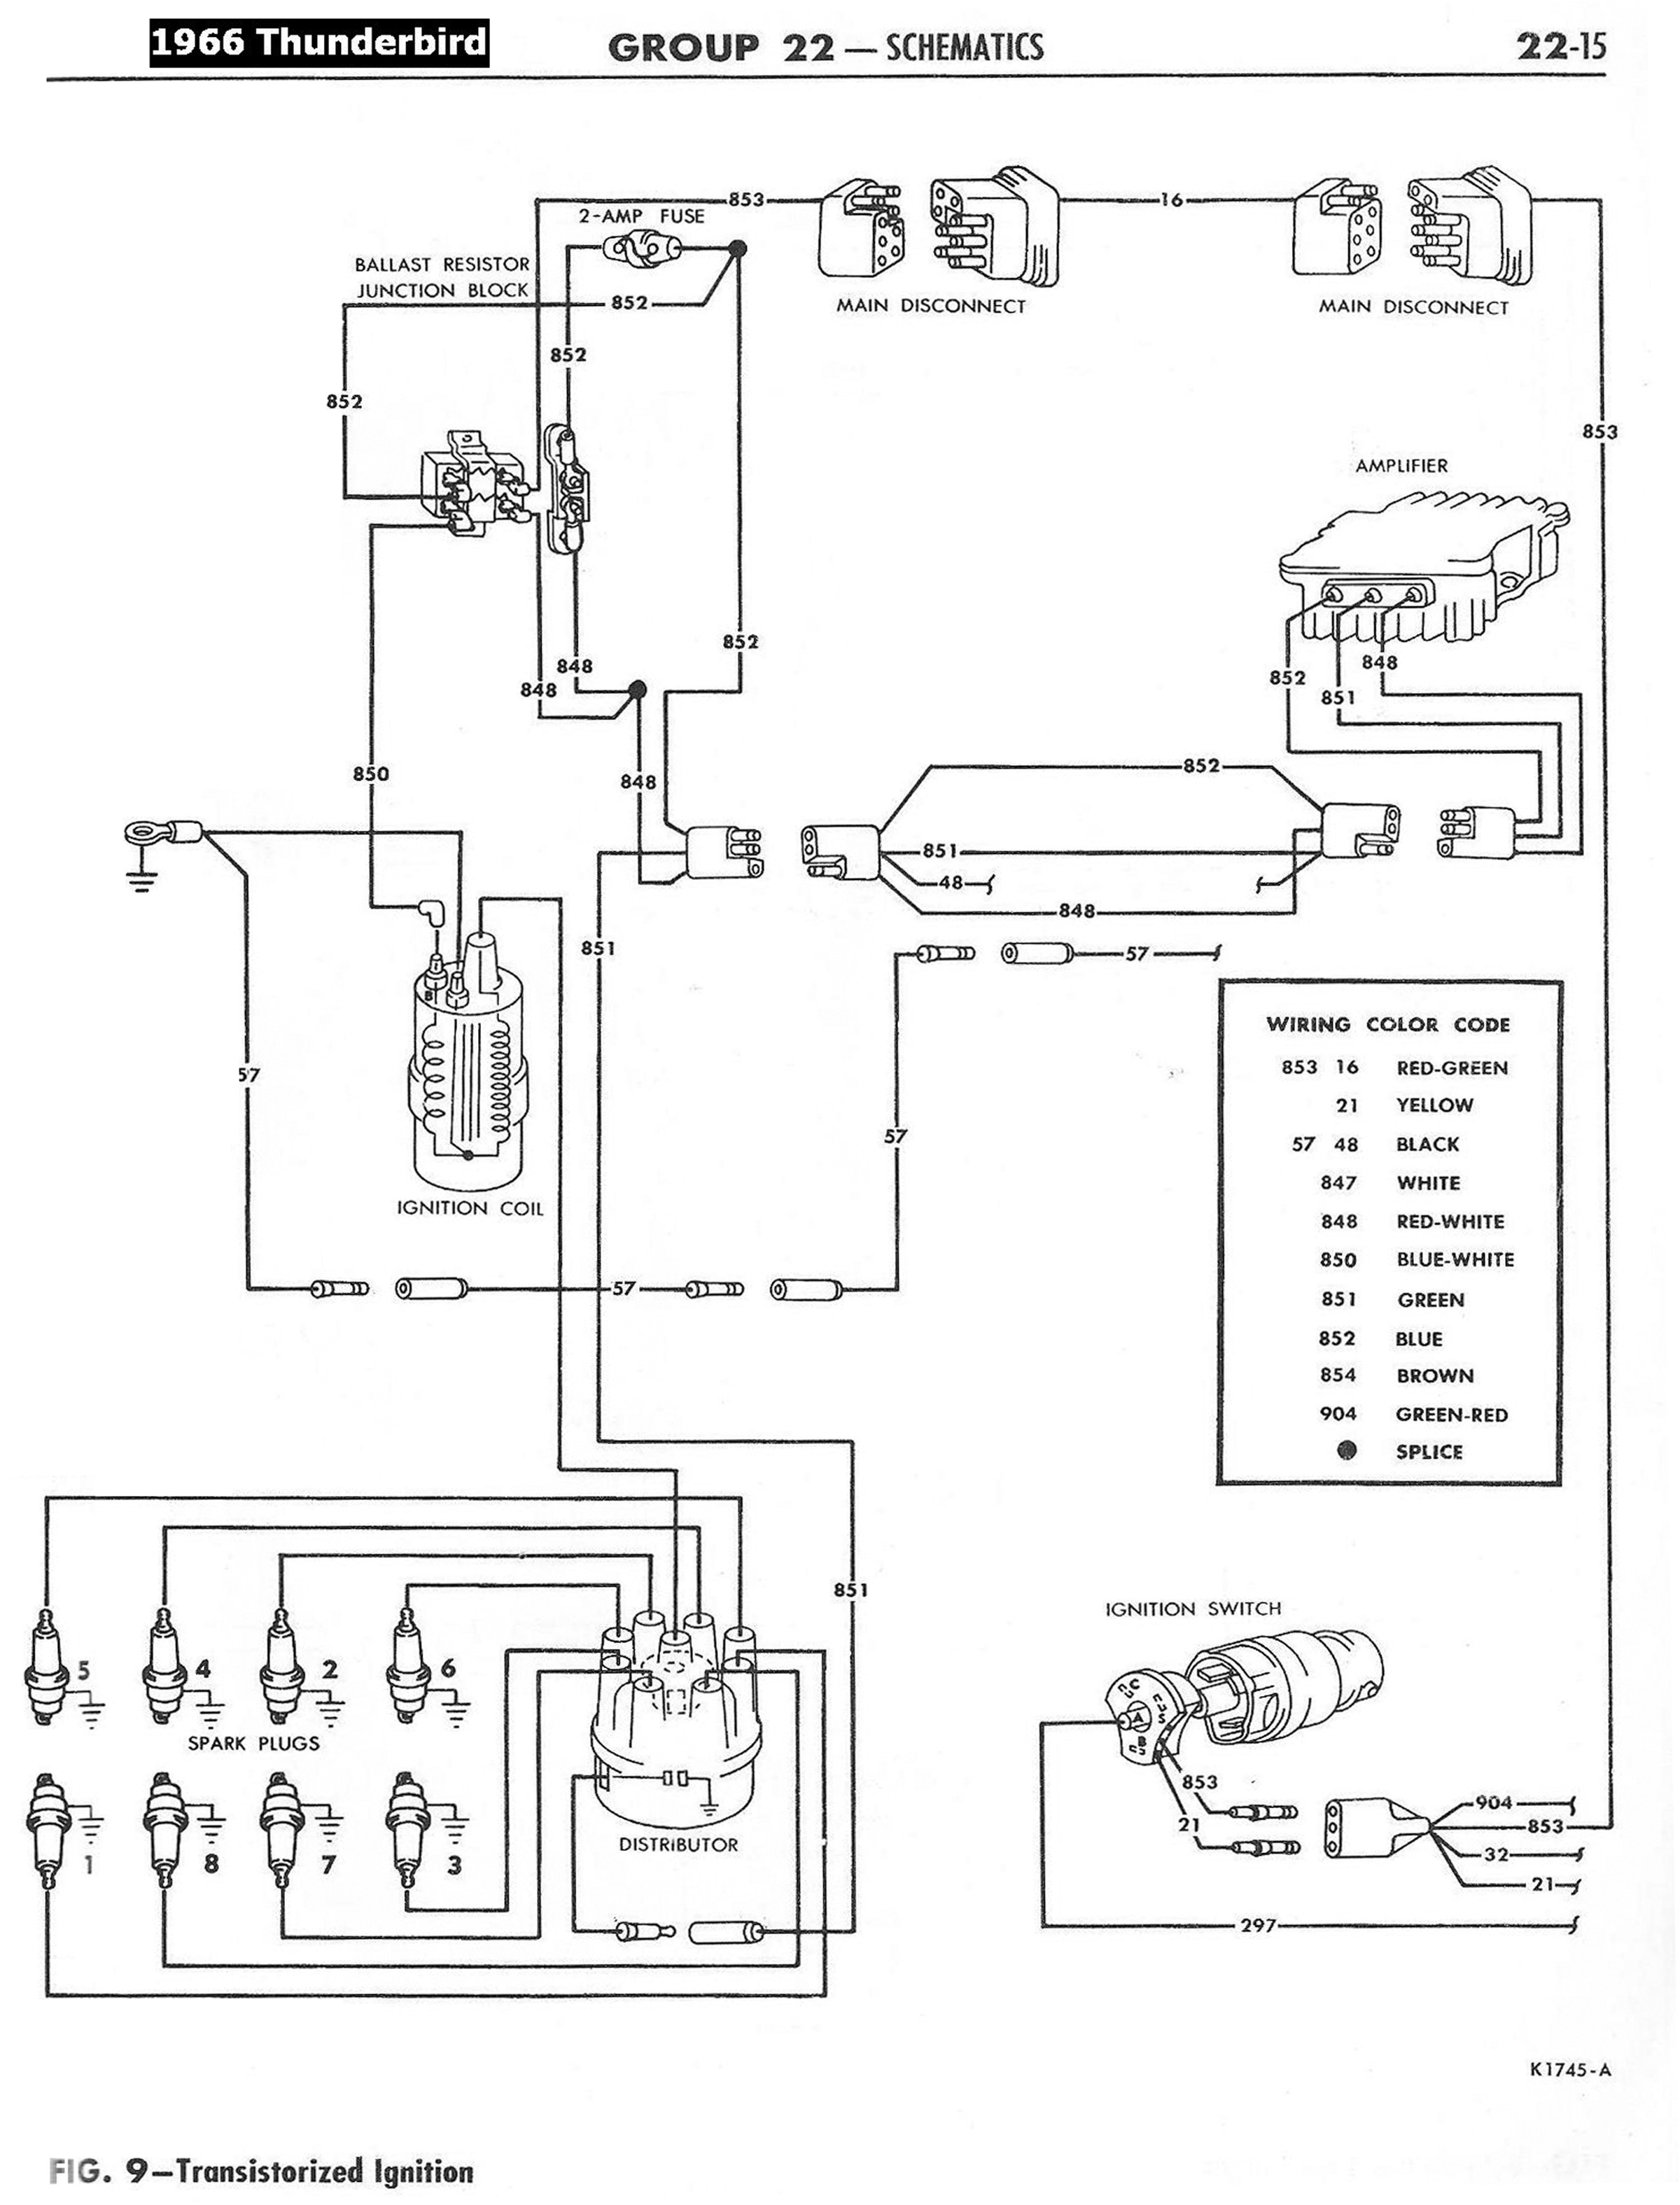 Ignition Coil Condenser Wiring Diagram With